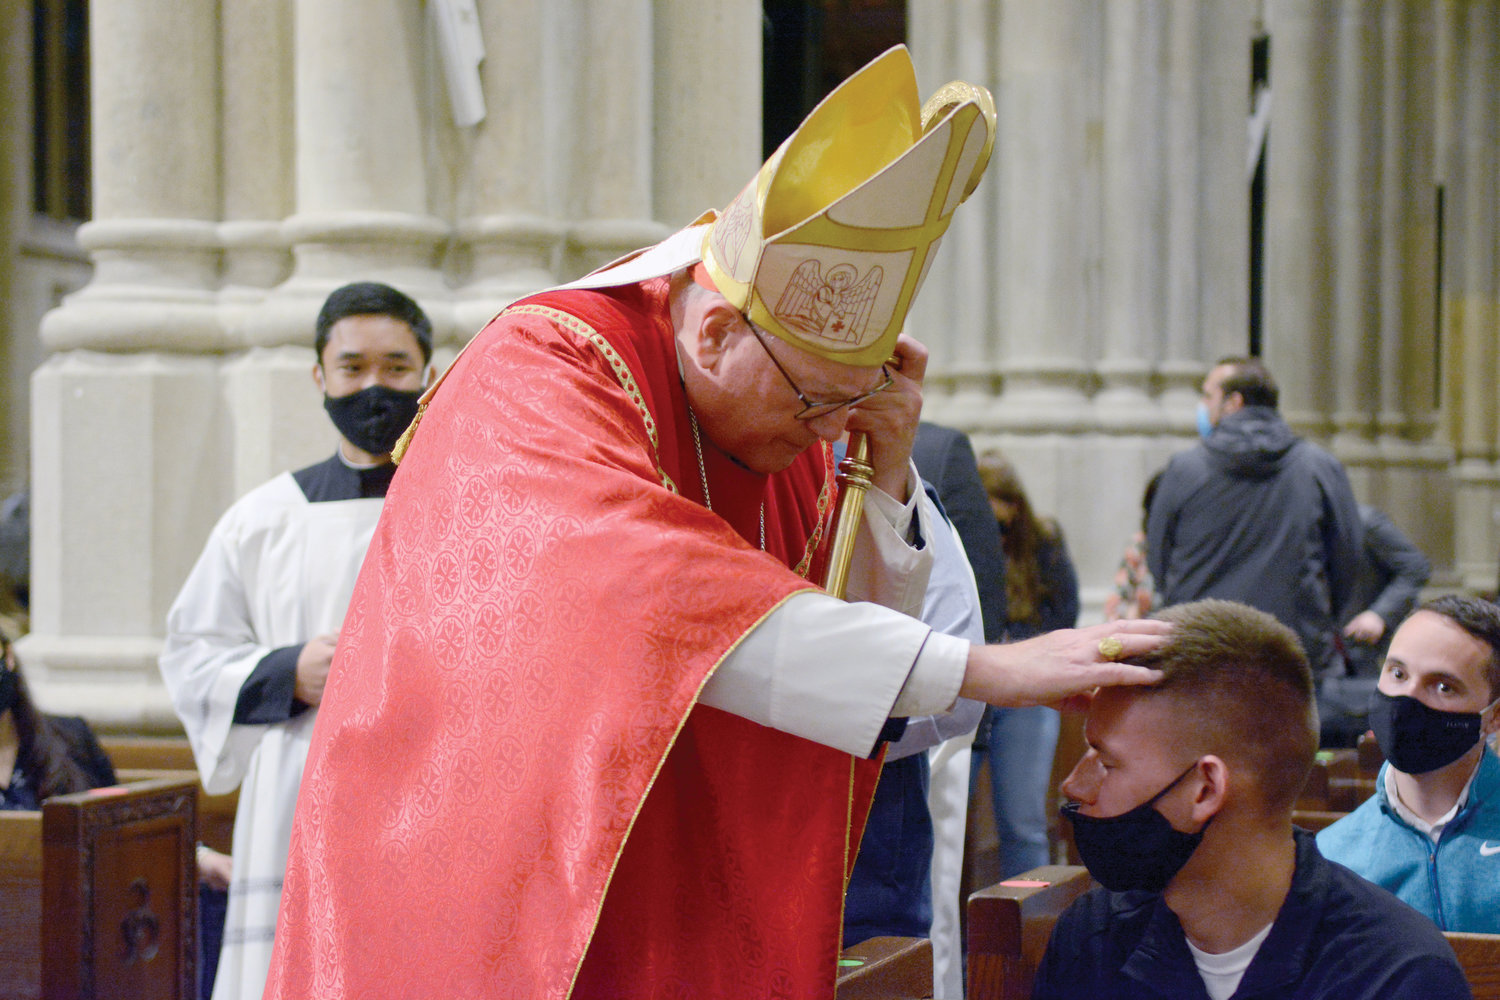 Cardinal Dolan blesses a young man during the evening liturgy. About 400 people attended the Mass, which is organized by the archdiocesan Office of Young Adult Outreach.